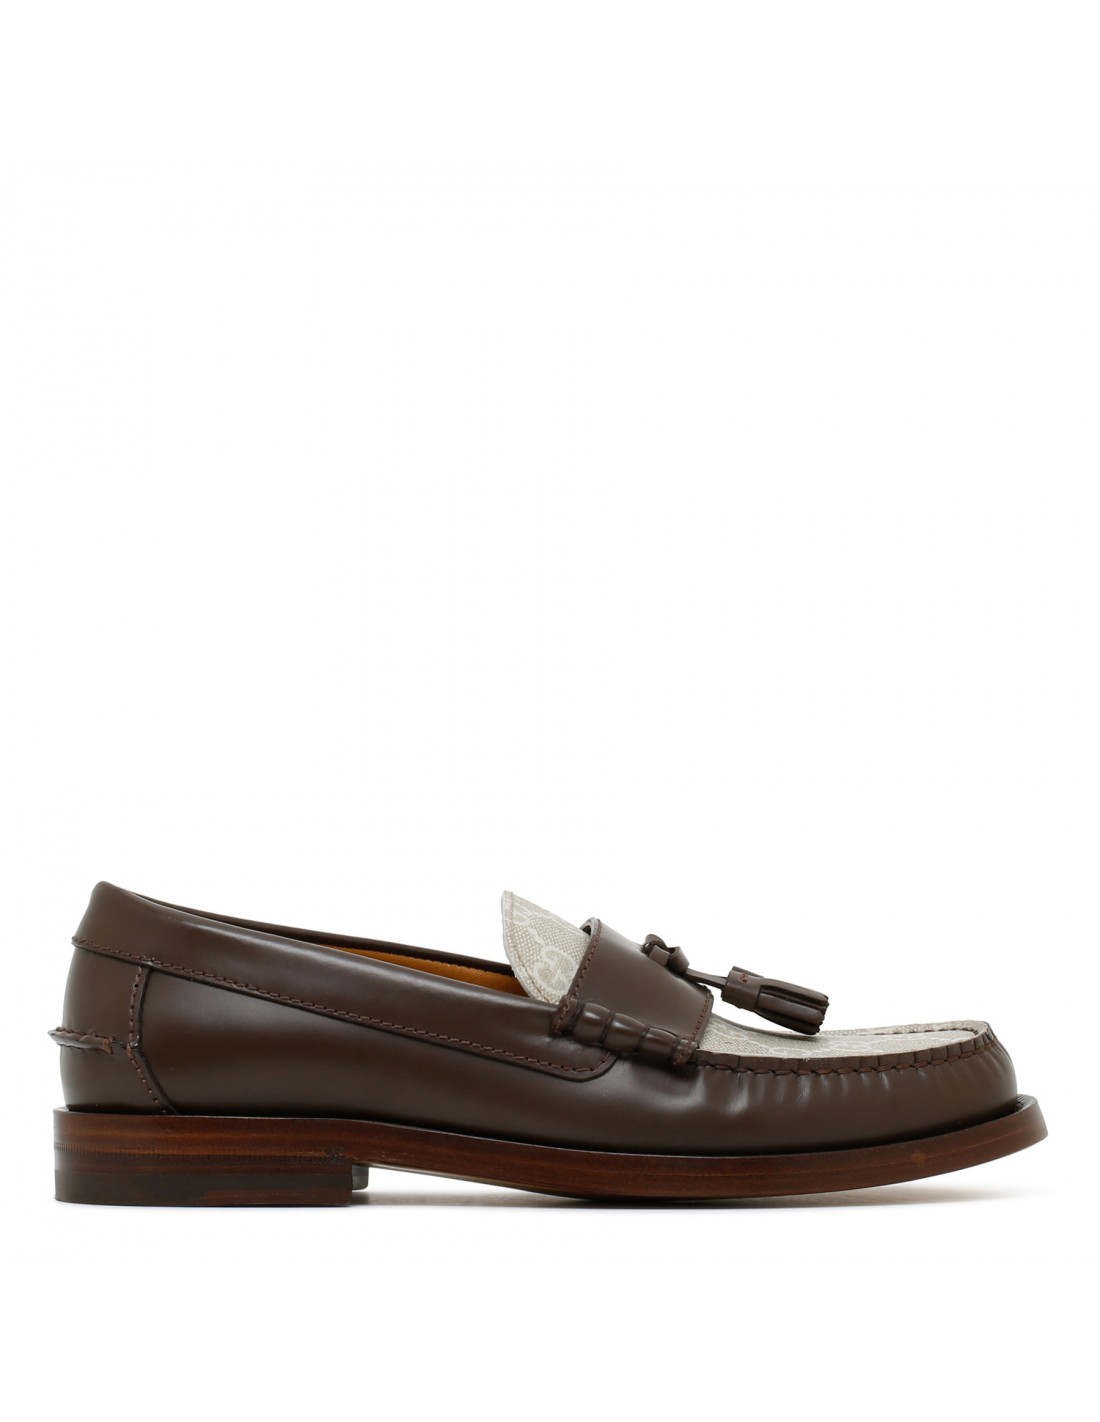 Brown leather tassel loafers